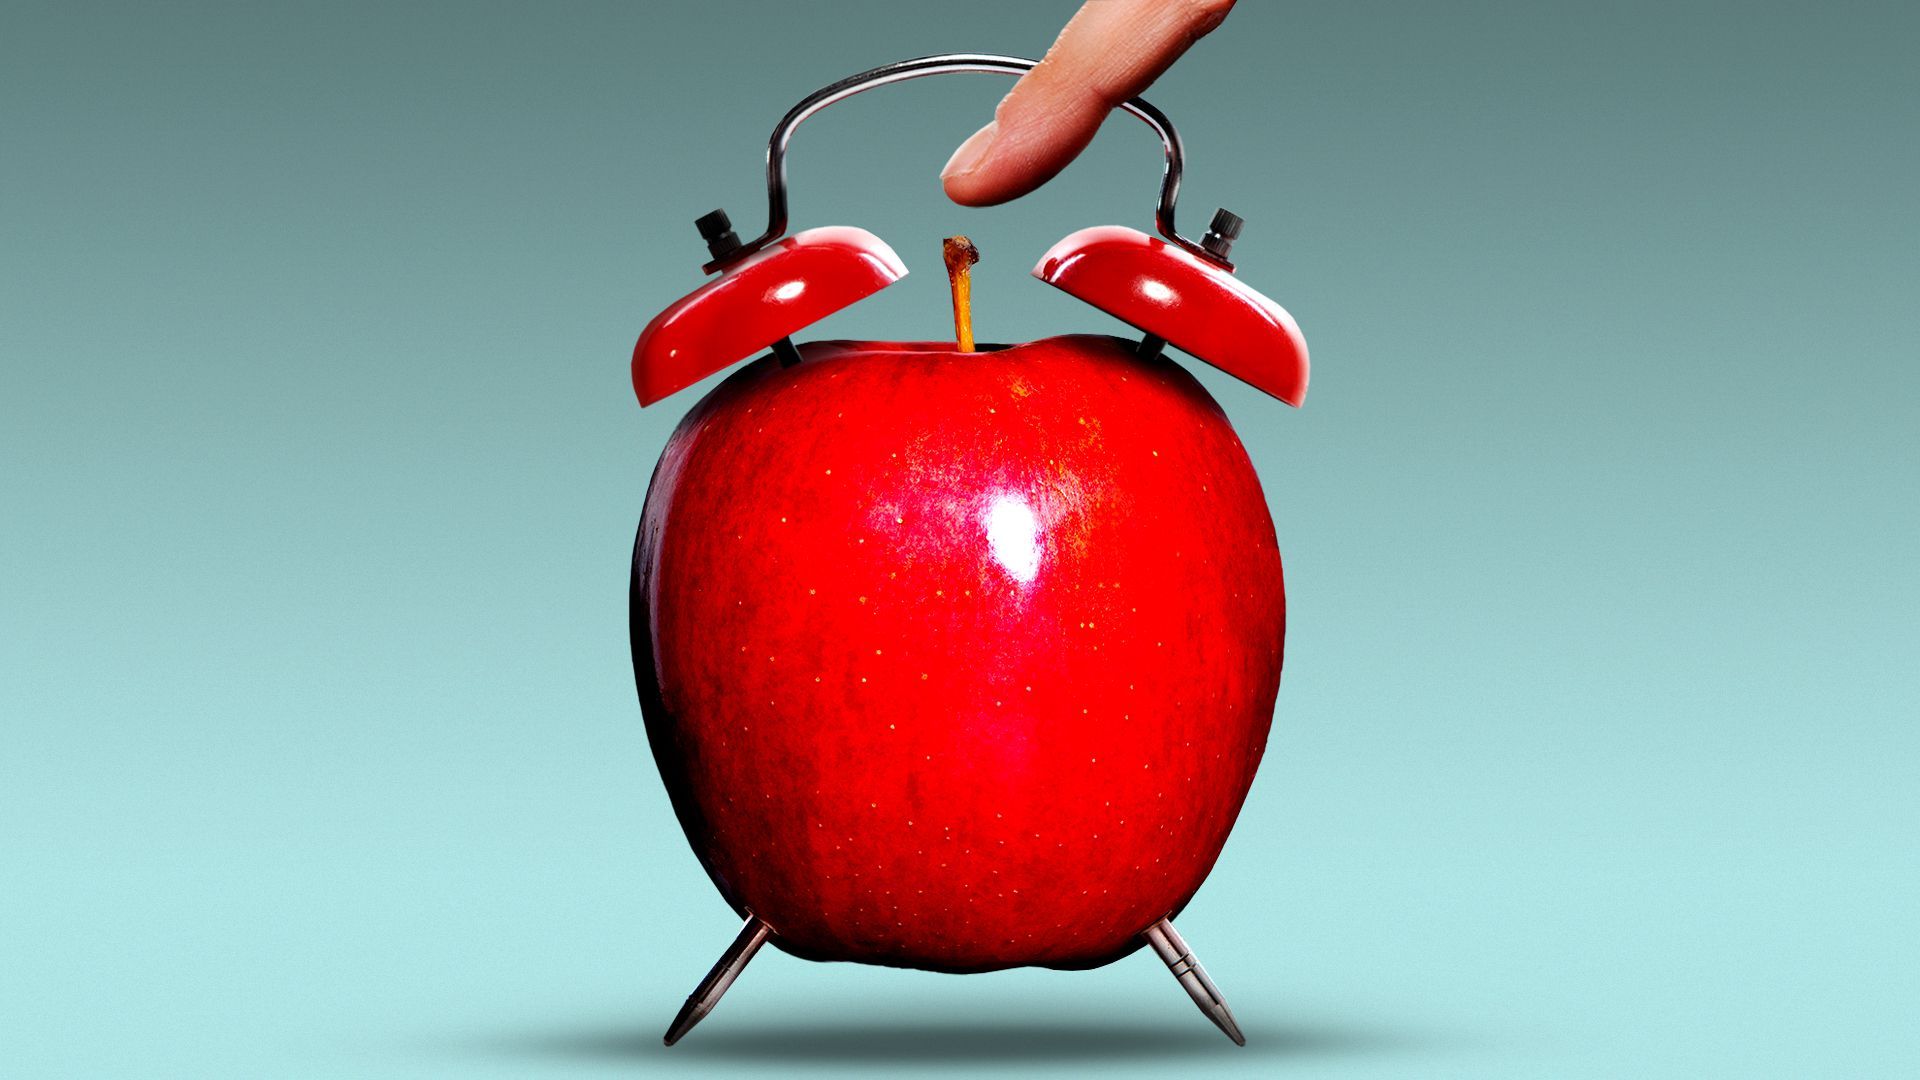 Illustration of a finger stretching out to turn off an alarm clock made from a red apple